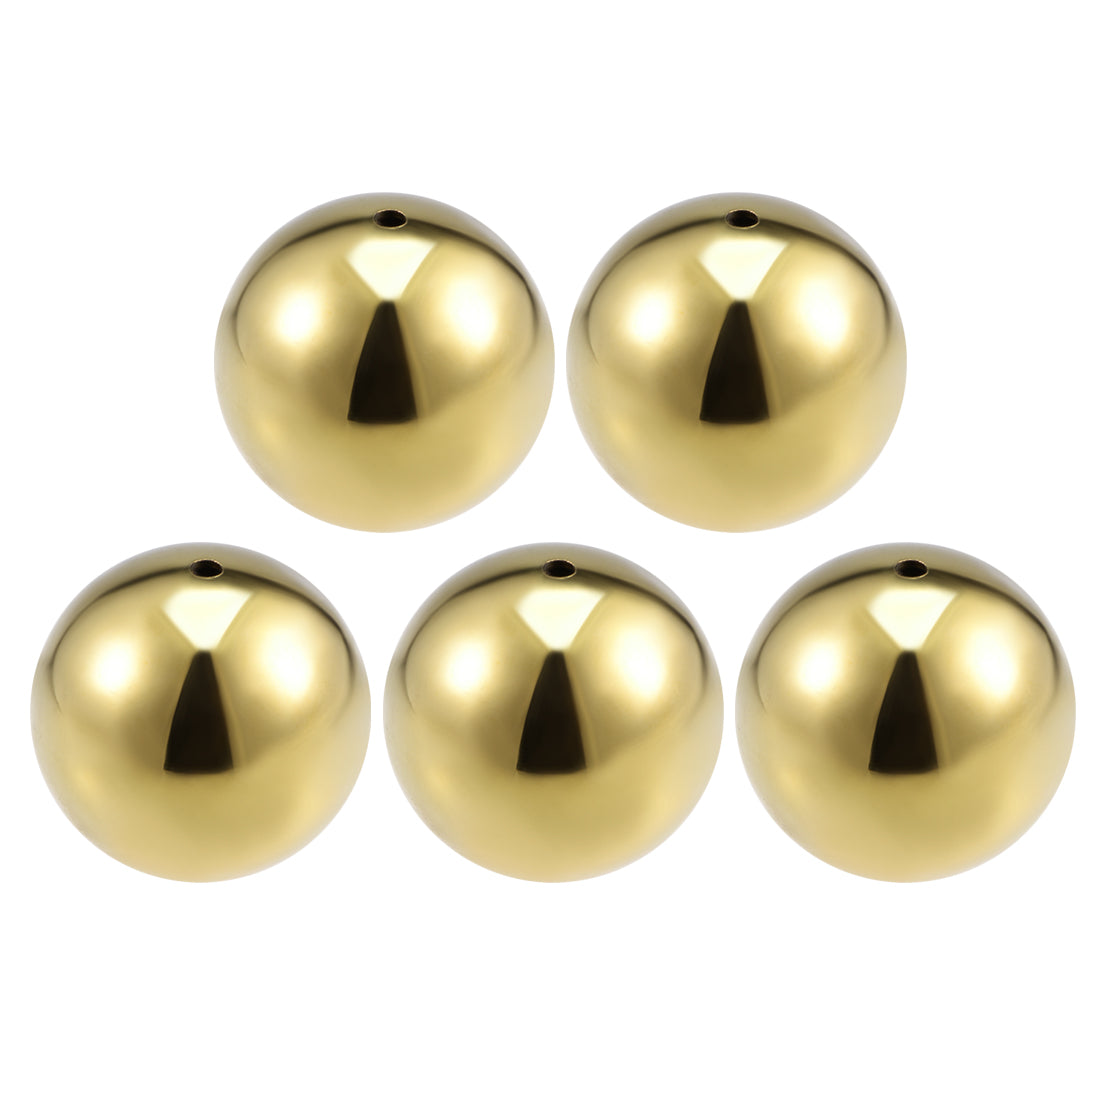 uxcell Uxcell 50mm Dia 201 Stainless Steel Hollow Cap Ball Spheres for Handrail Stair Newel Post Gold Tone 5pcs